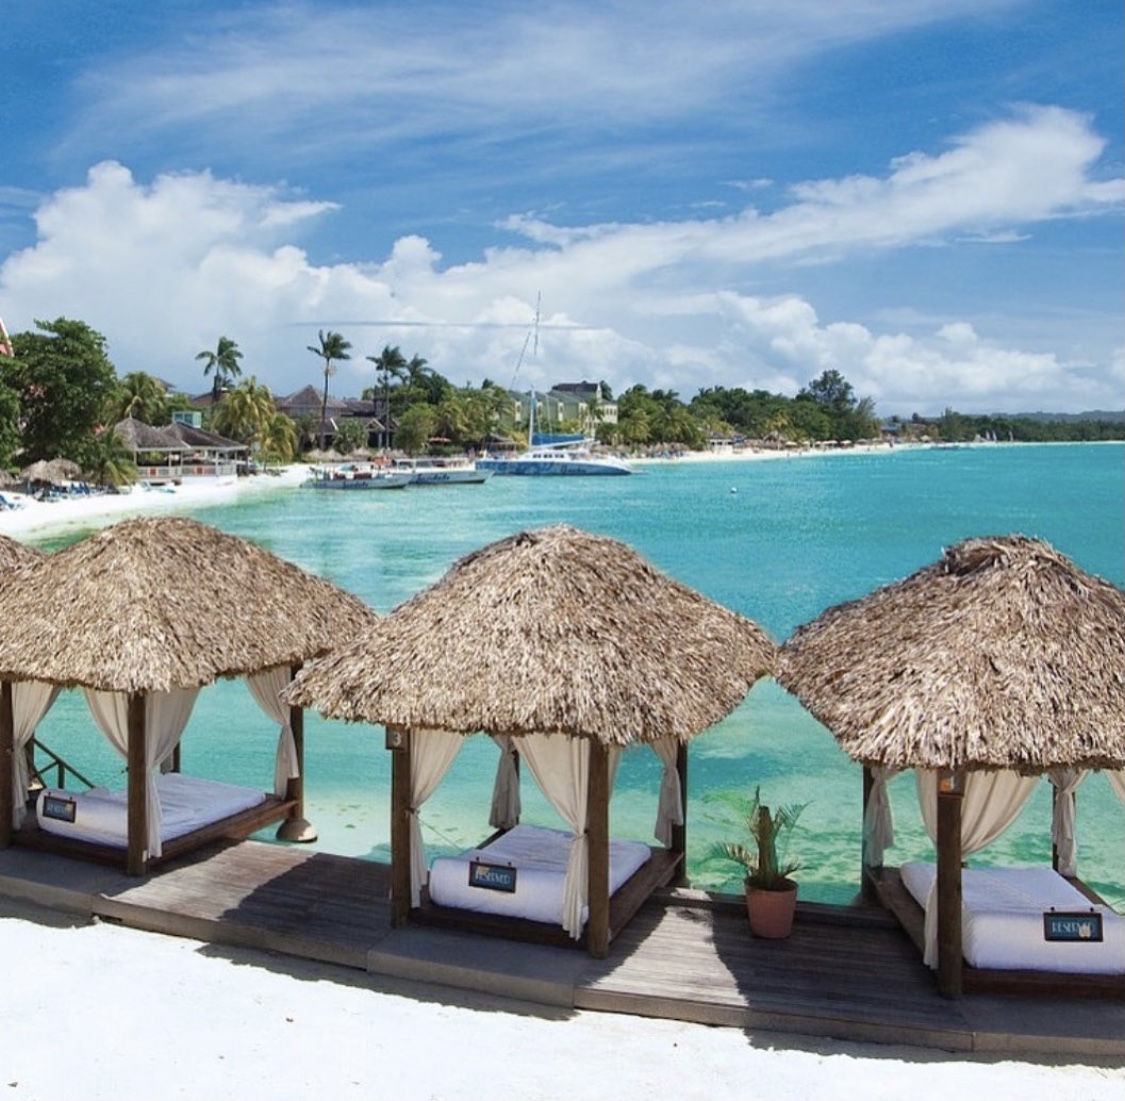 The Best Sandals Suites and Destination Wedding Locations in Jamaica for Social Distancing from Honeymoons Inc.